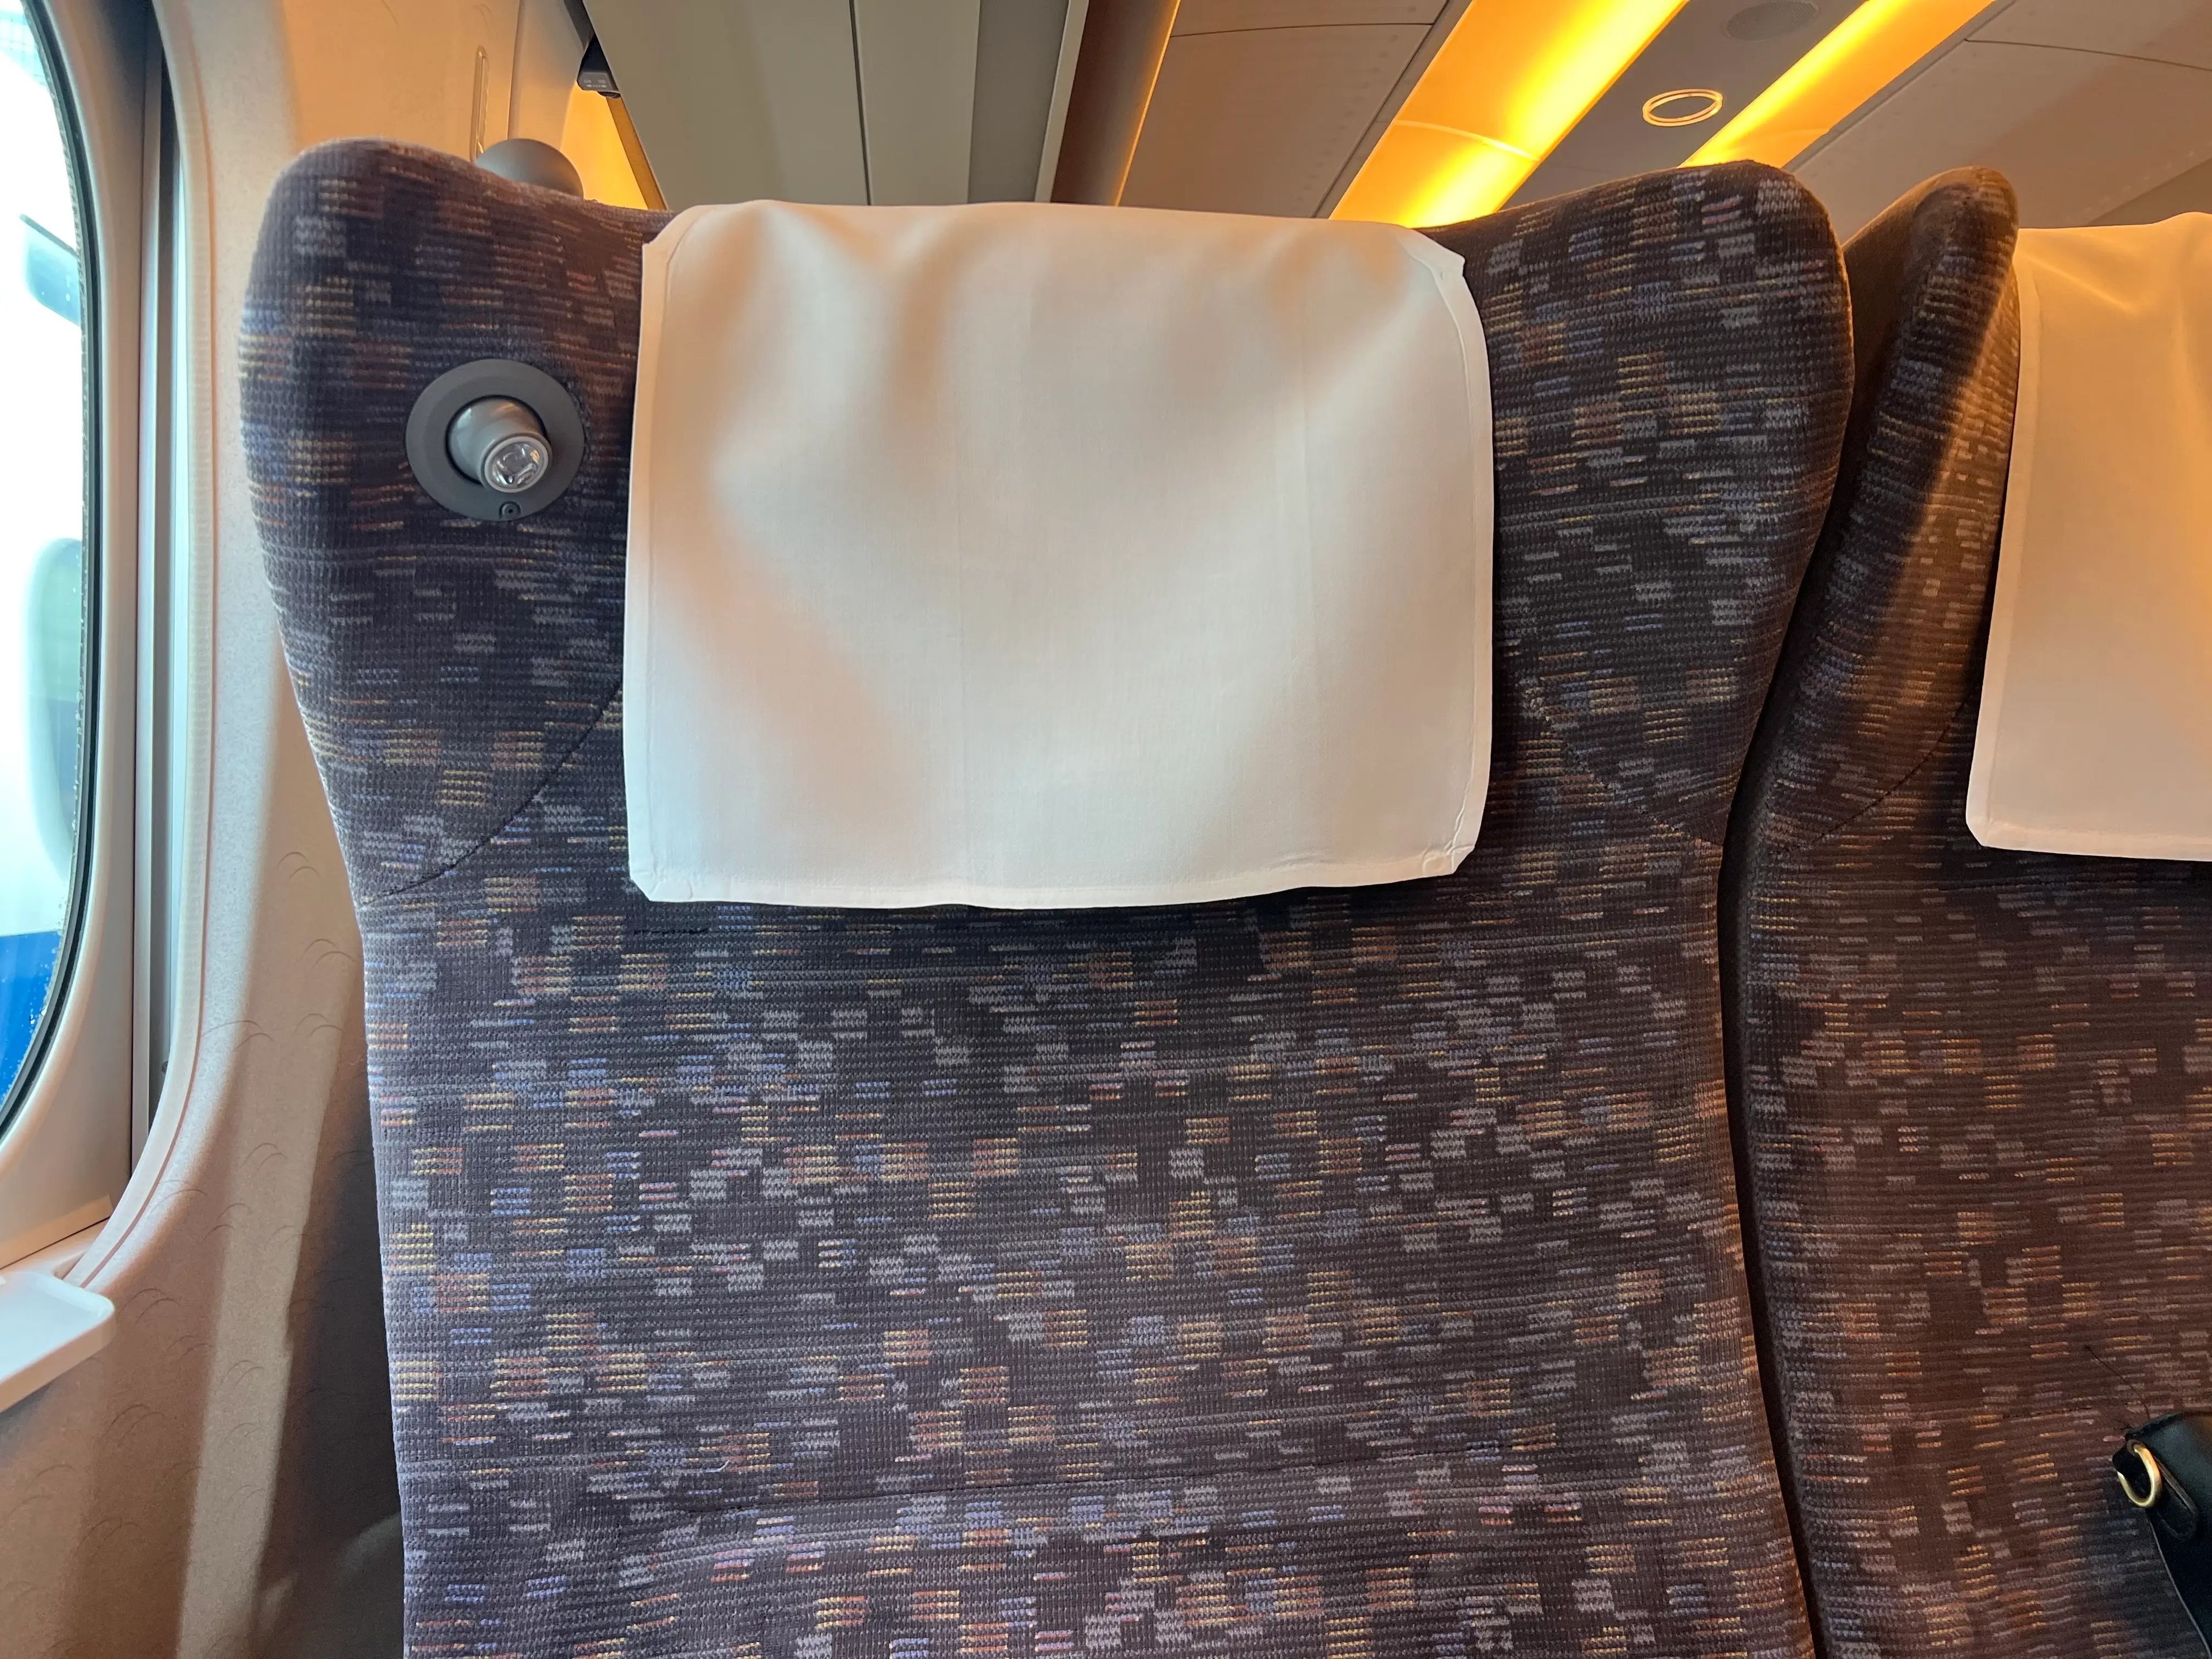 The author’s first class seat on the bullet train in Japan.